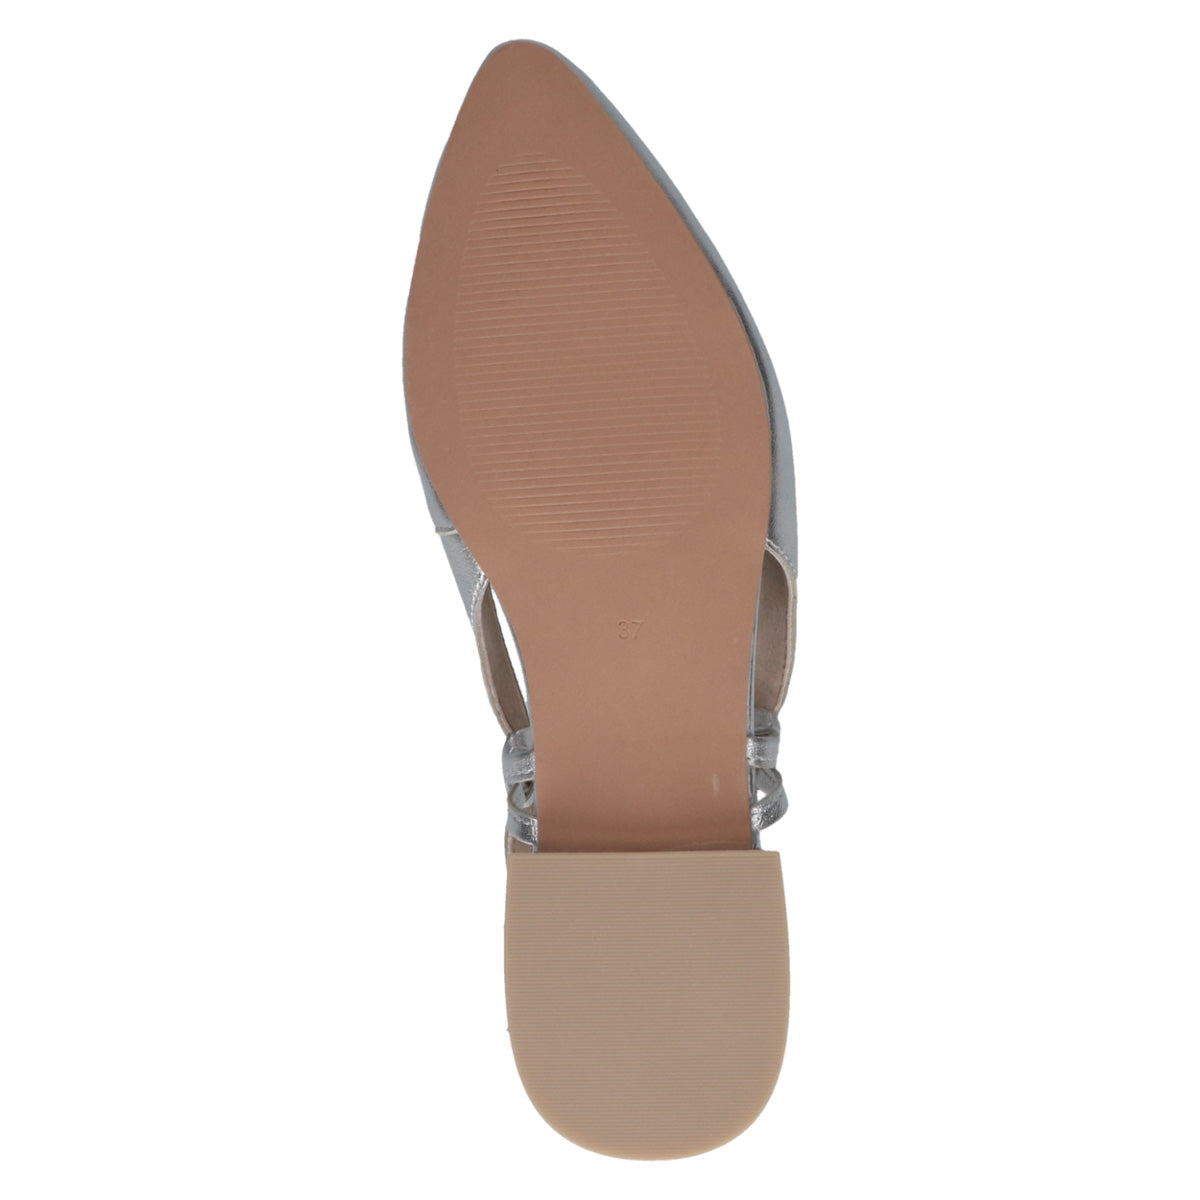 Caprice Stylish Silver Heel Shoes with Diamante Detail